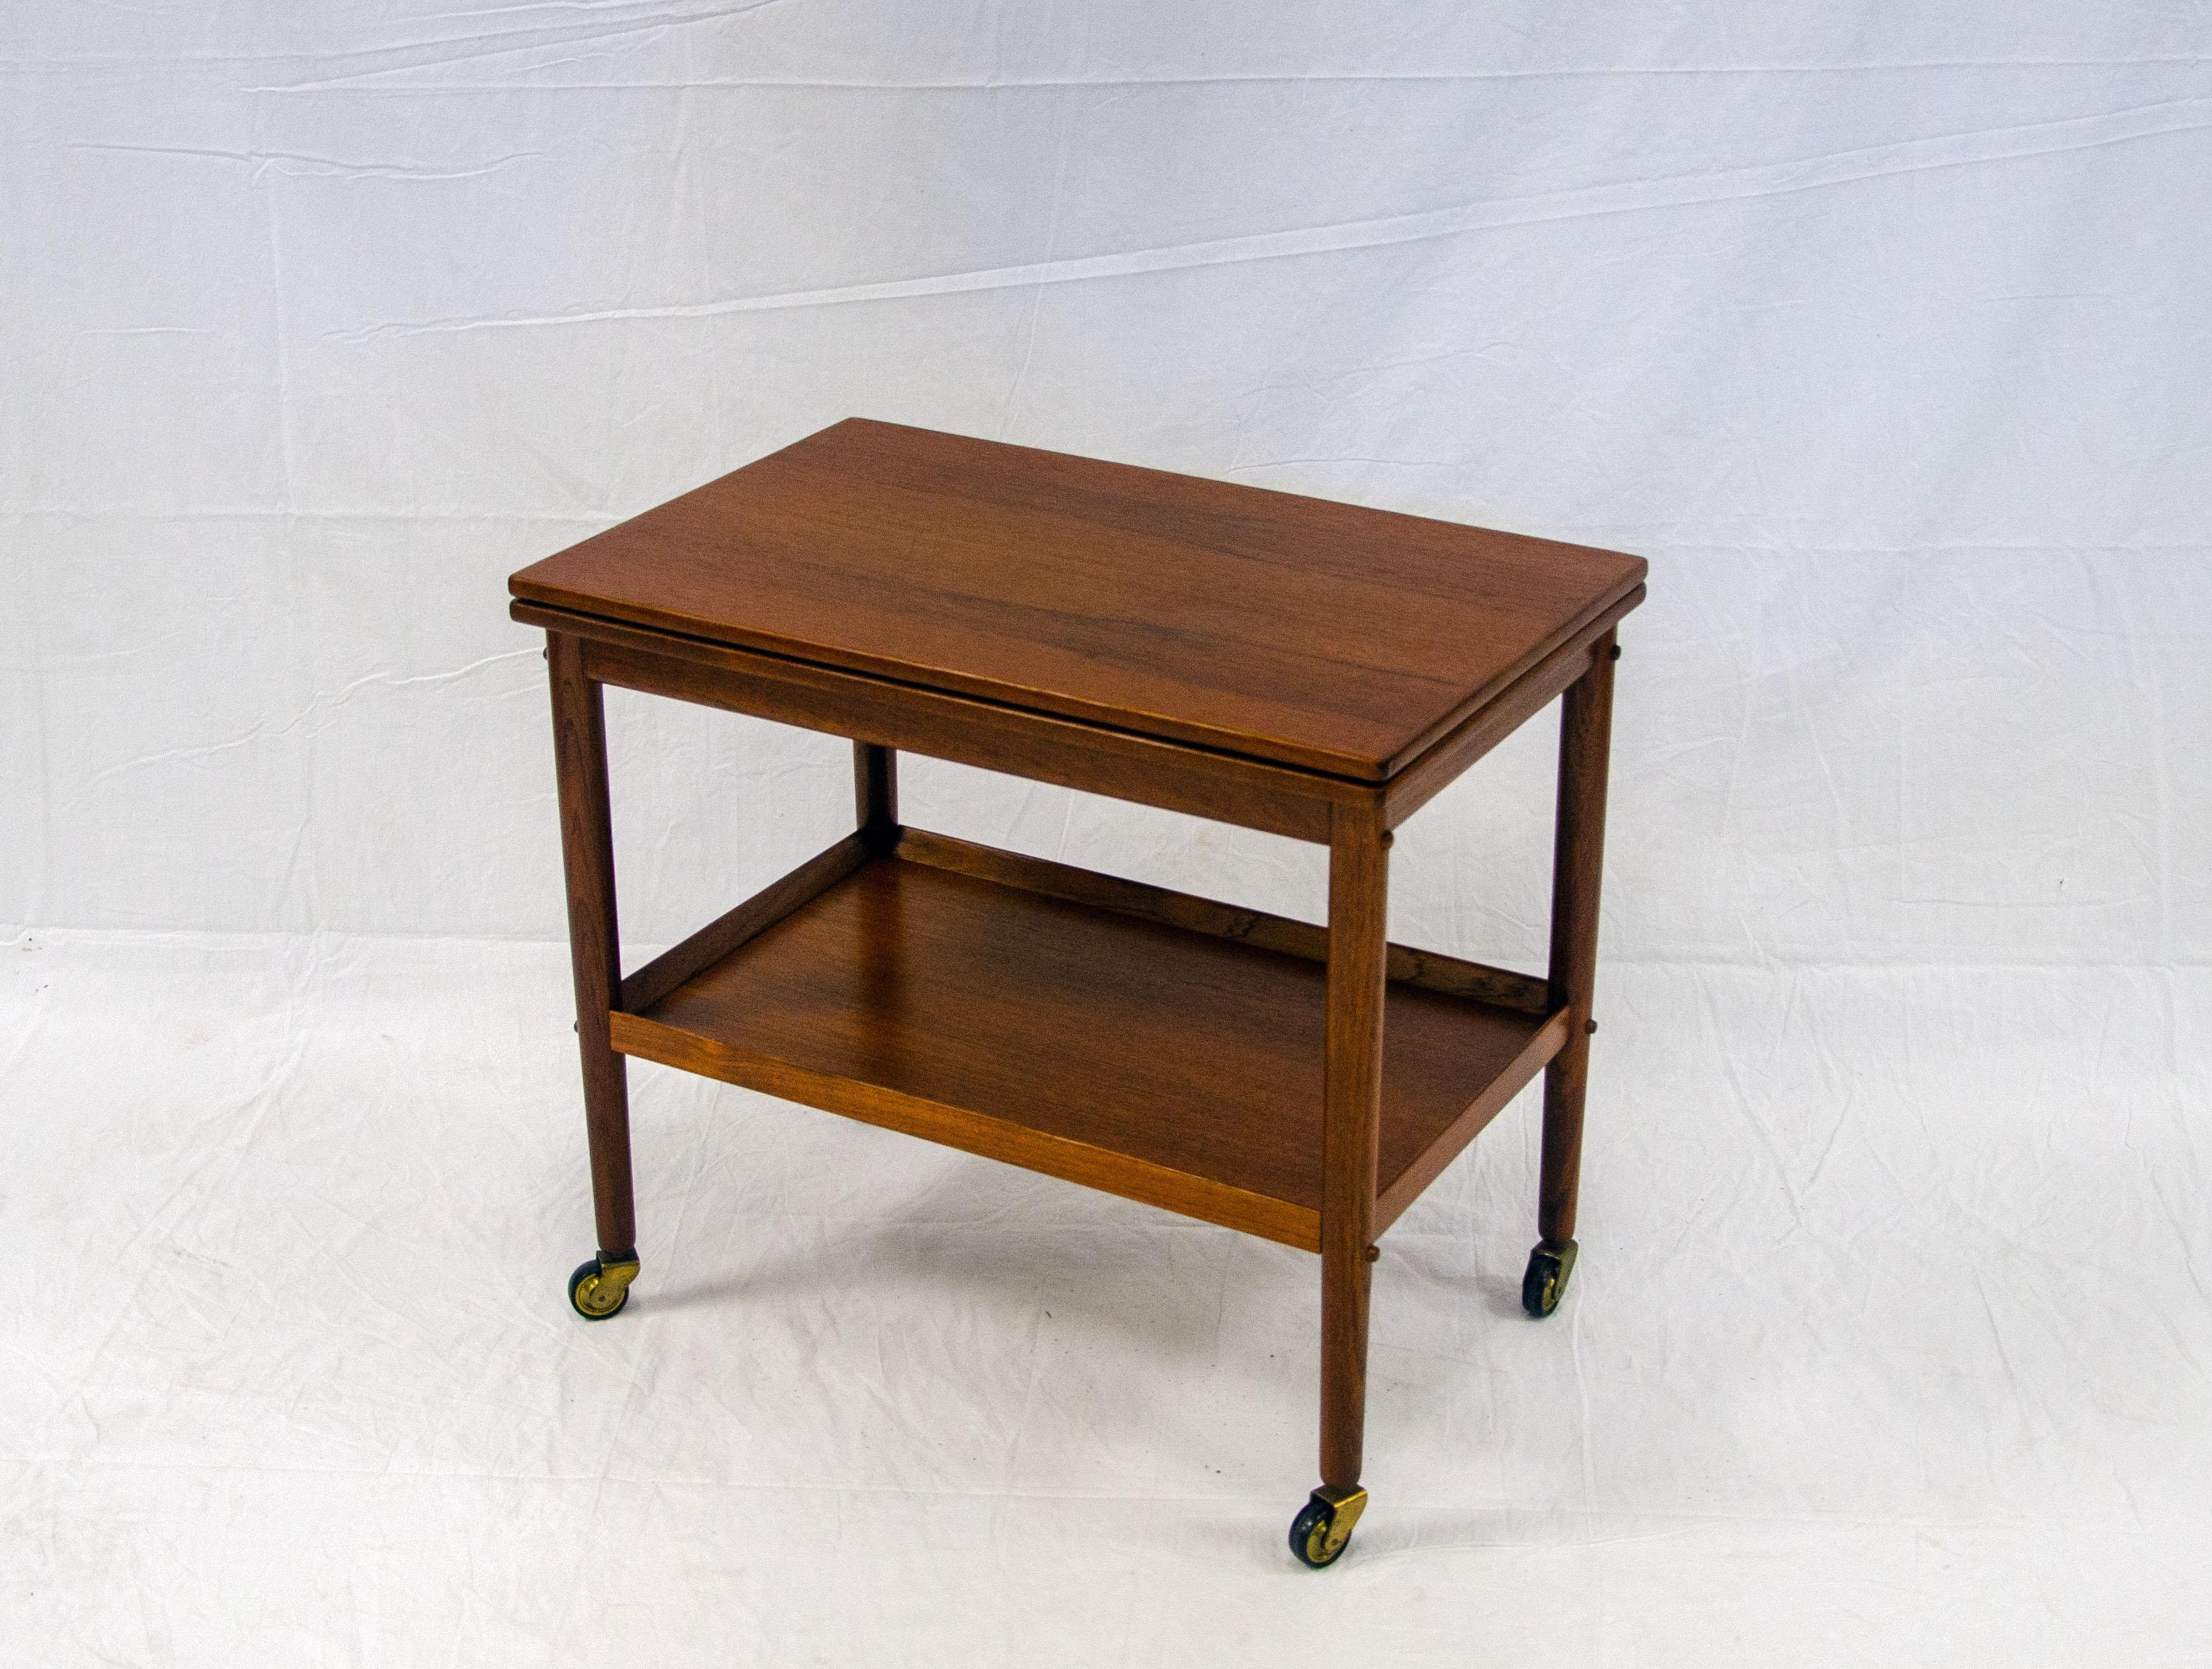 This Danish teak rolling cart has an expanding top that rotates on the base and flips open to make a 35 1/2